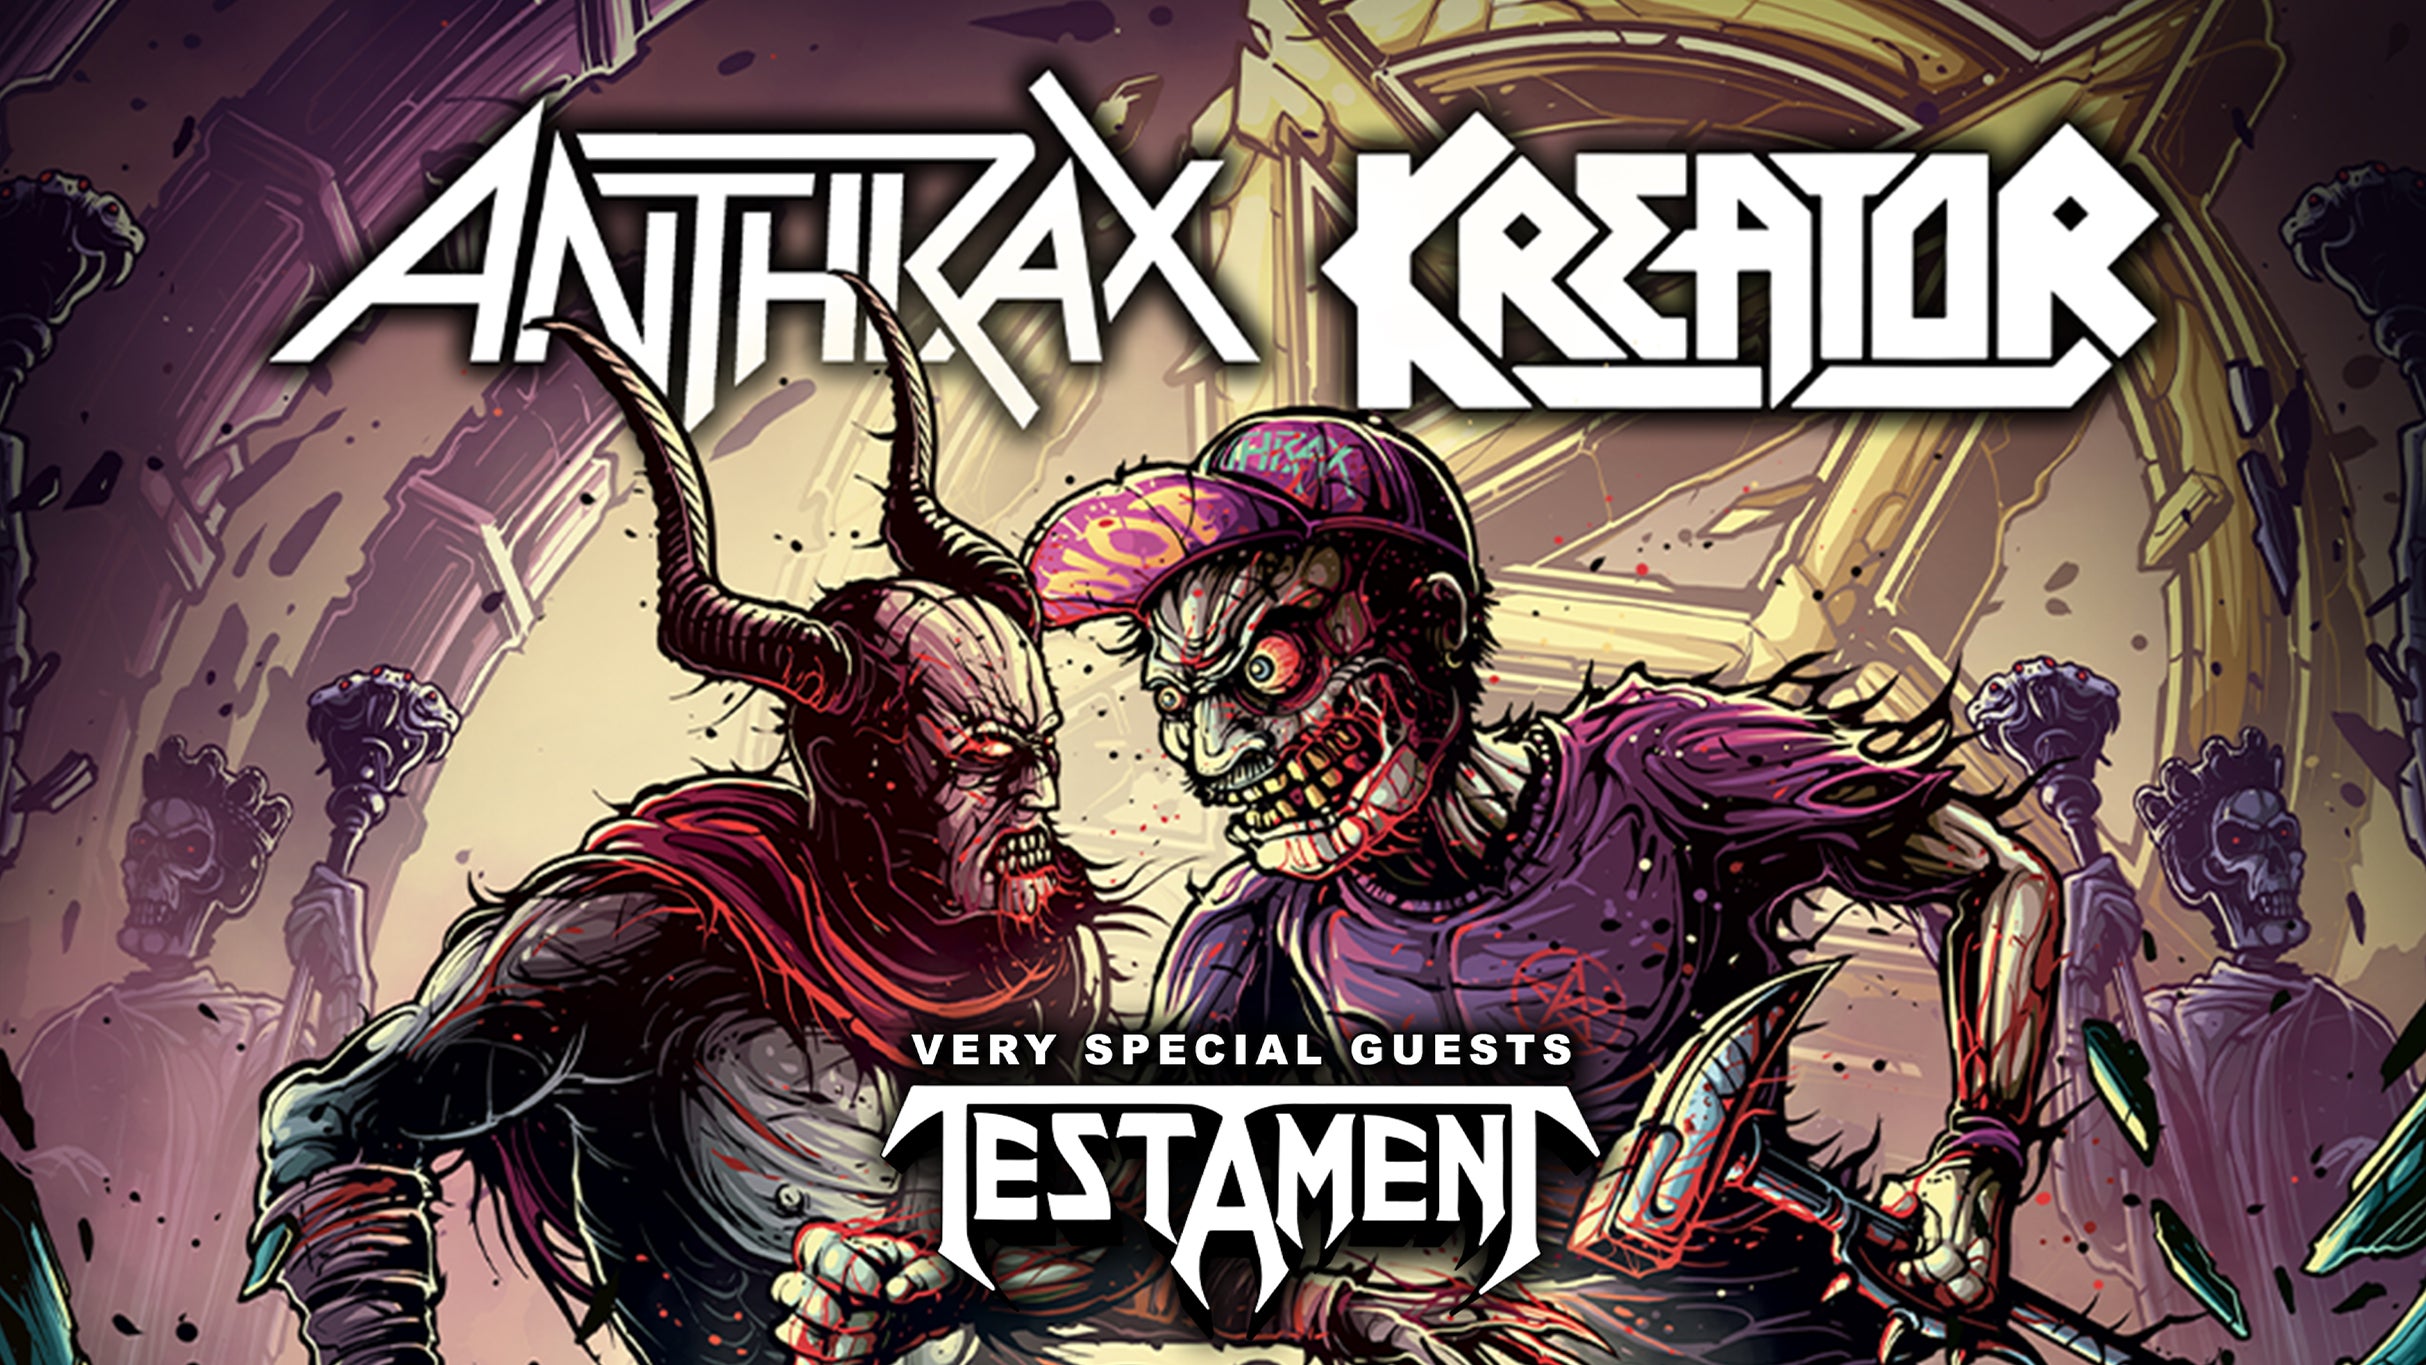 Anthrax & Kreator - Co-Headline Event Title Pic